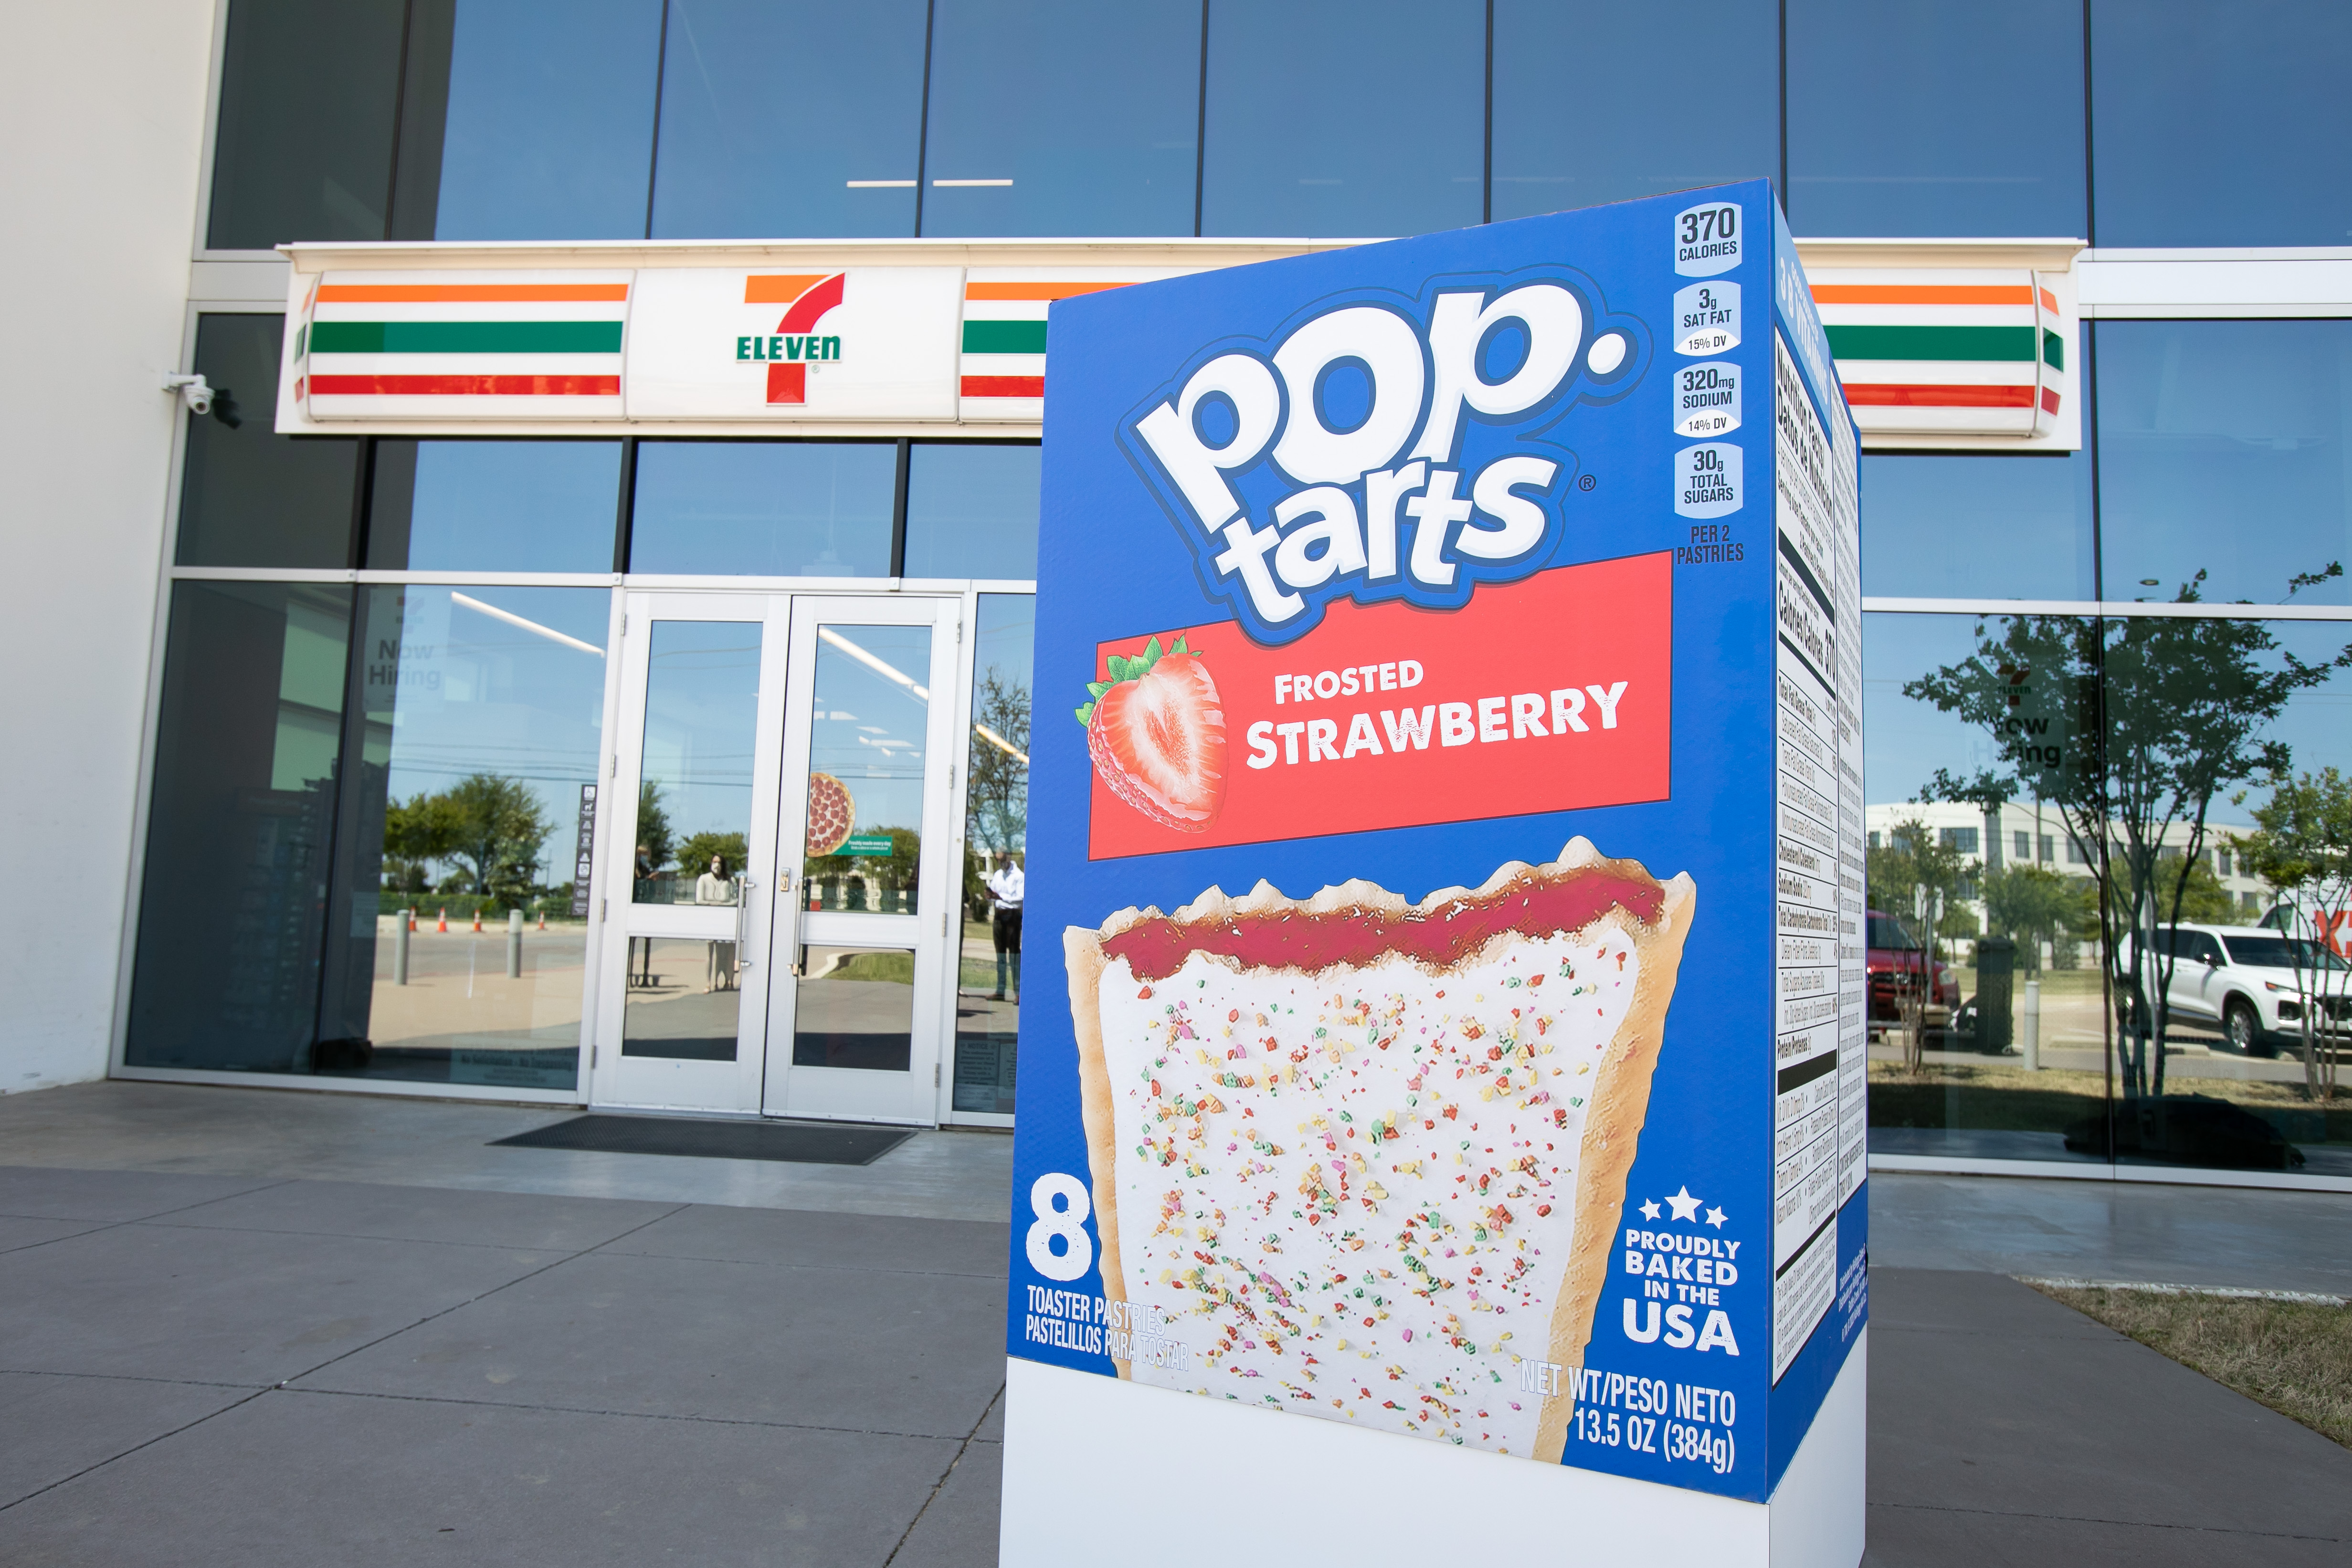 Kellogg Company and 7-Eleven, Inc. unveiled the World’s Largest Box of Toaster Pastries filled with Pop-Tarts in the parking lot of the 7-Eleven Store Support Center in Dallas, setting a new Guinness World Record. The box, filled with 1,331 lbs. of individual packages of toaster pastries, will be donated directly to the North Texas Food Bank (NTFB) Feeding Network—NTFB is a Feeding America member food bank.